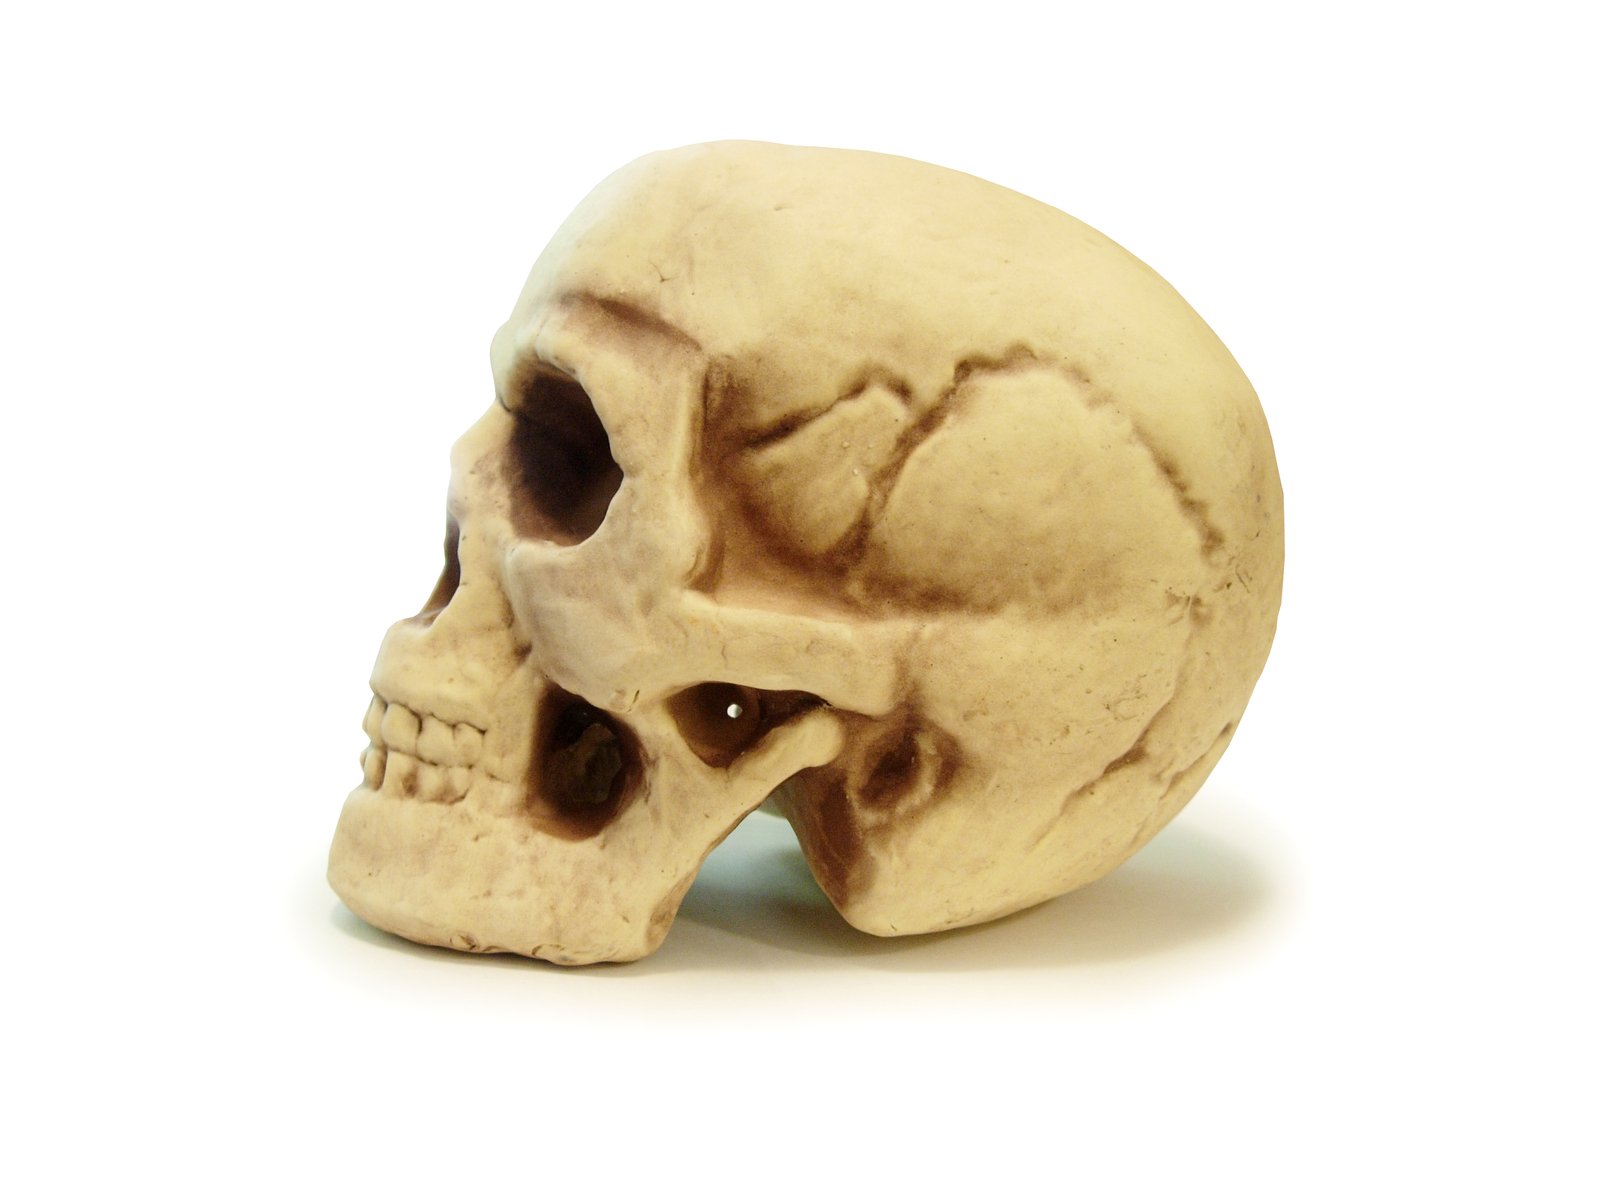 a close up of a skull on a white background